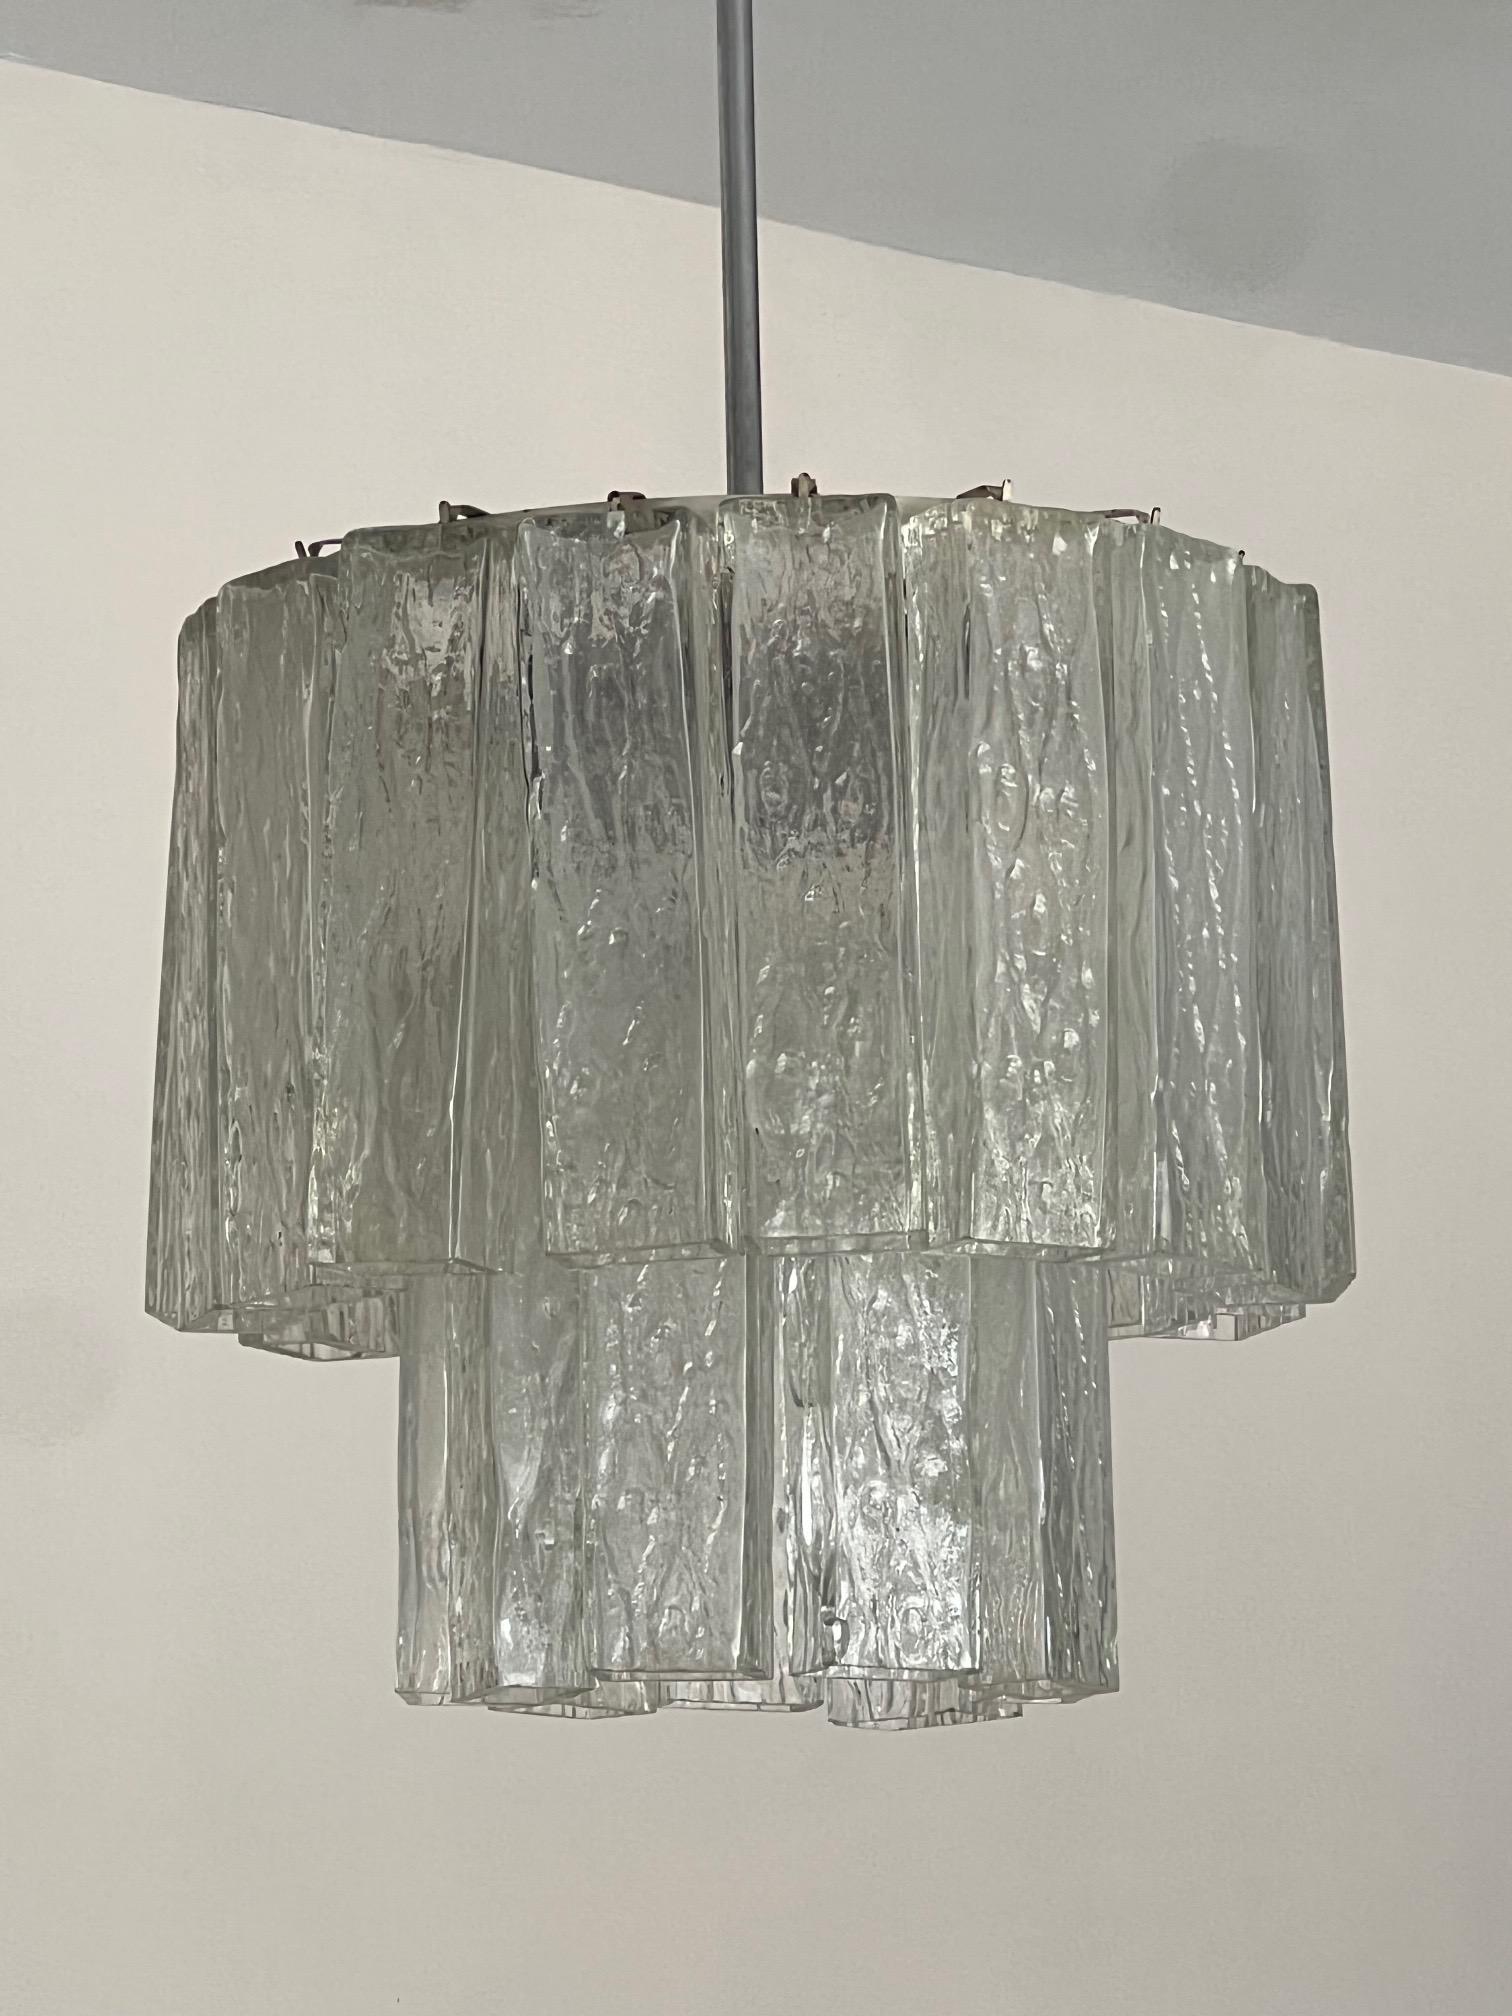 An elegant and simple Italian murano chandelier 'ca' 1970's. Chromed stem and canopy with beautiful Murano glass shades.Glass measures approx 16